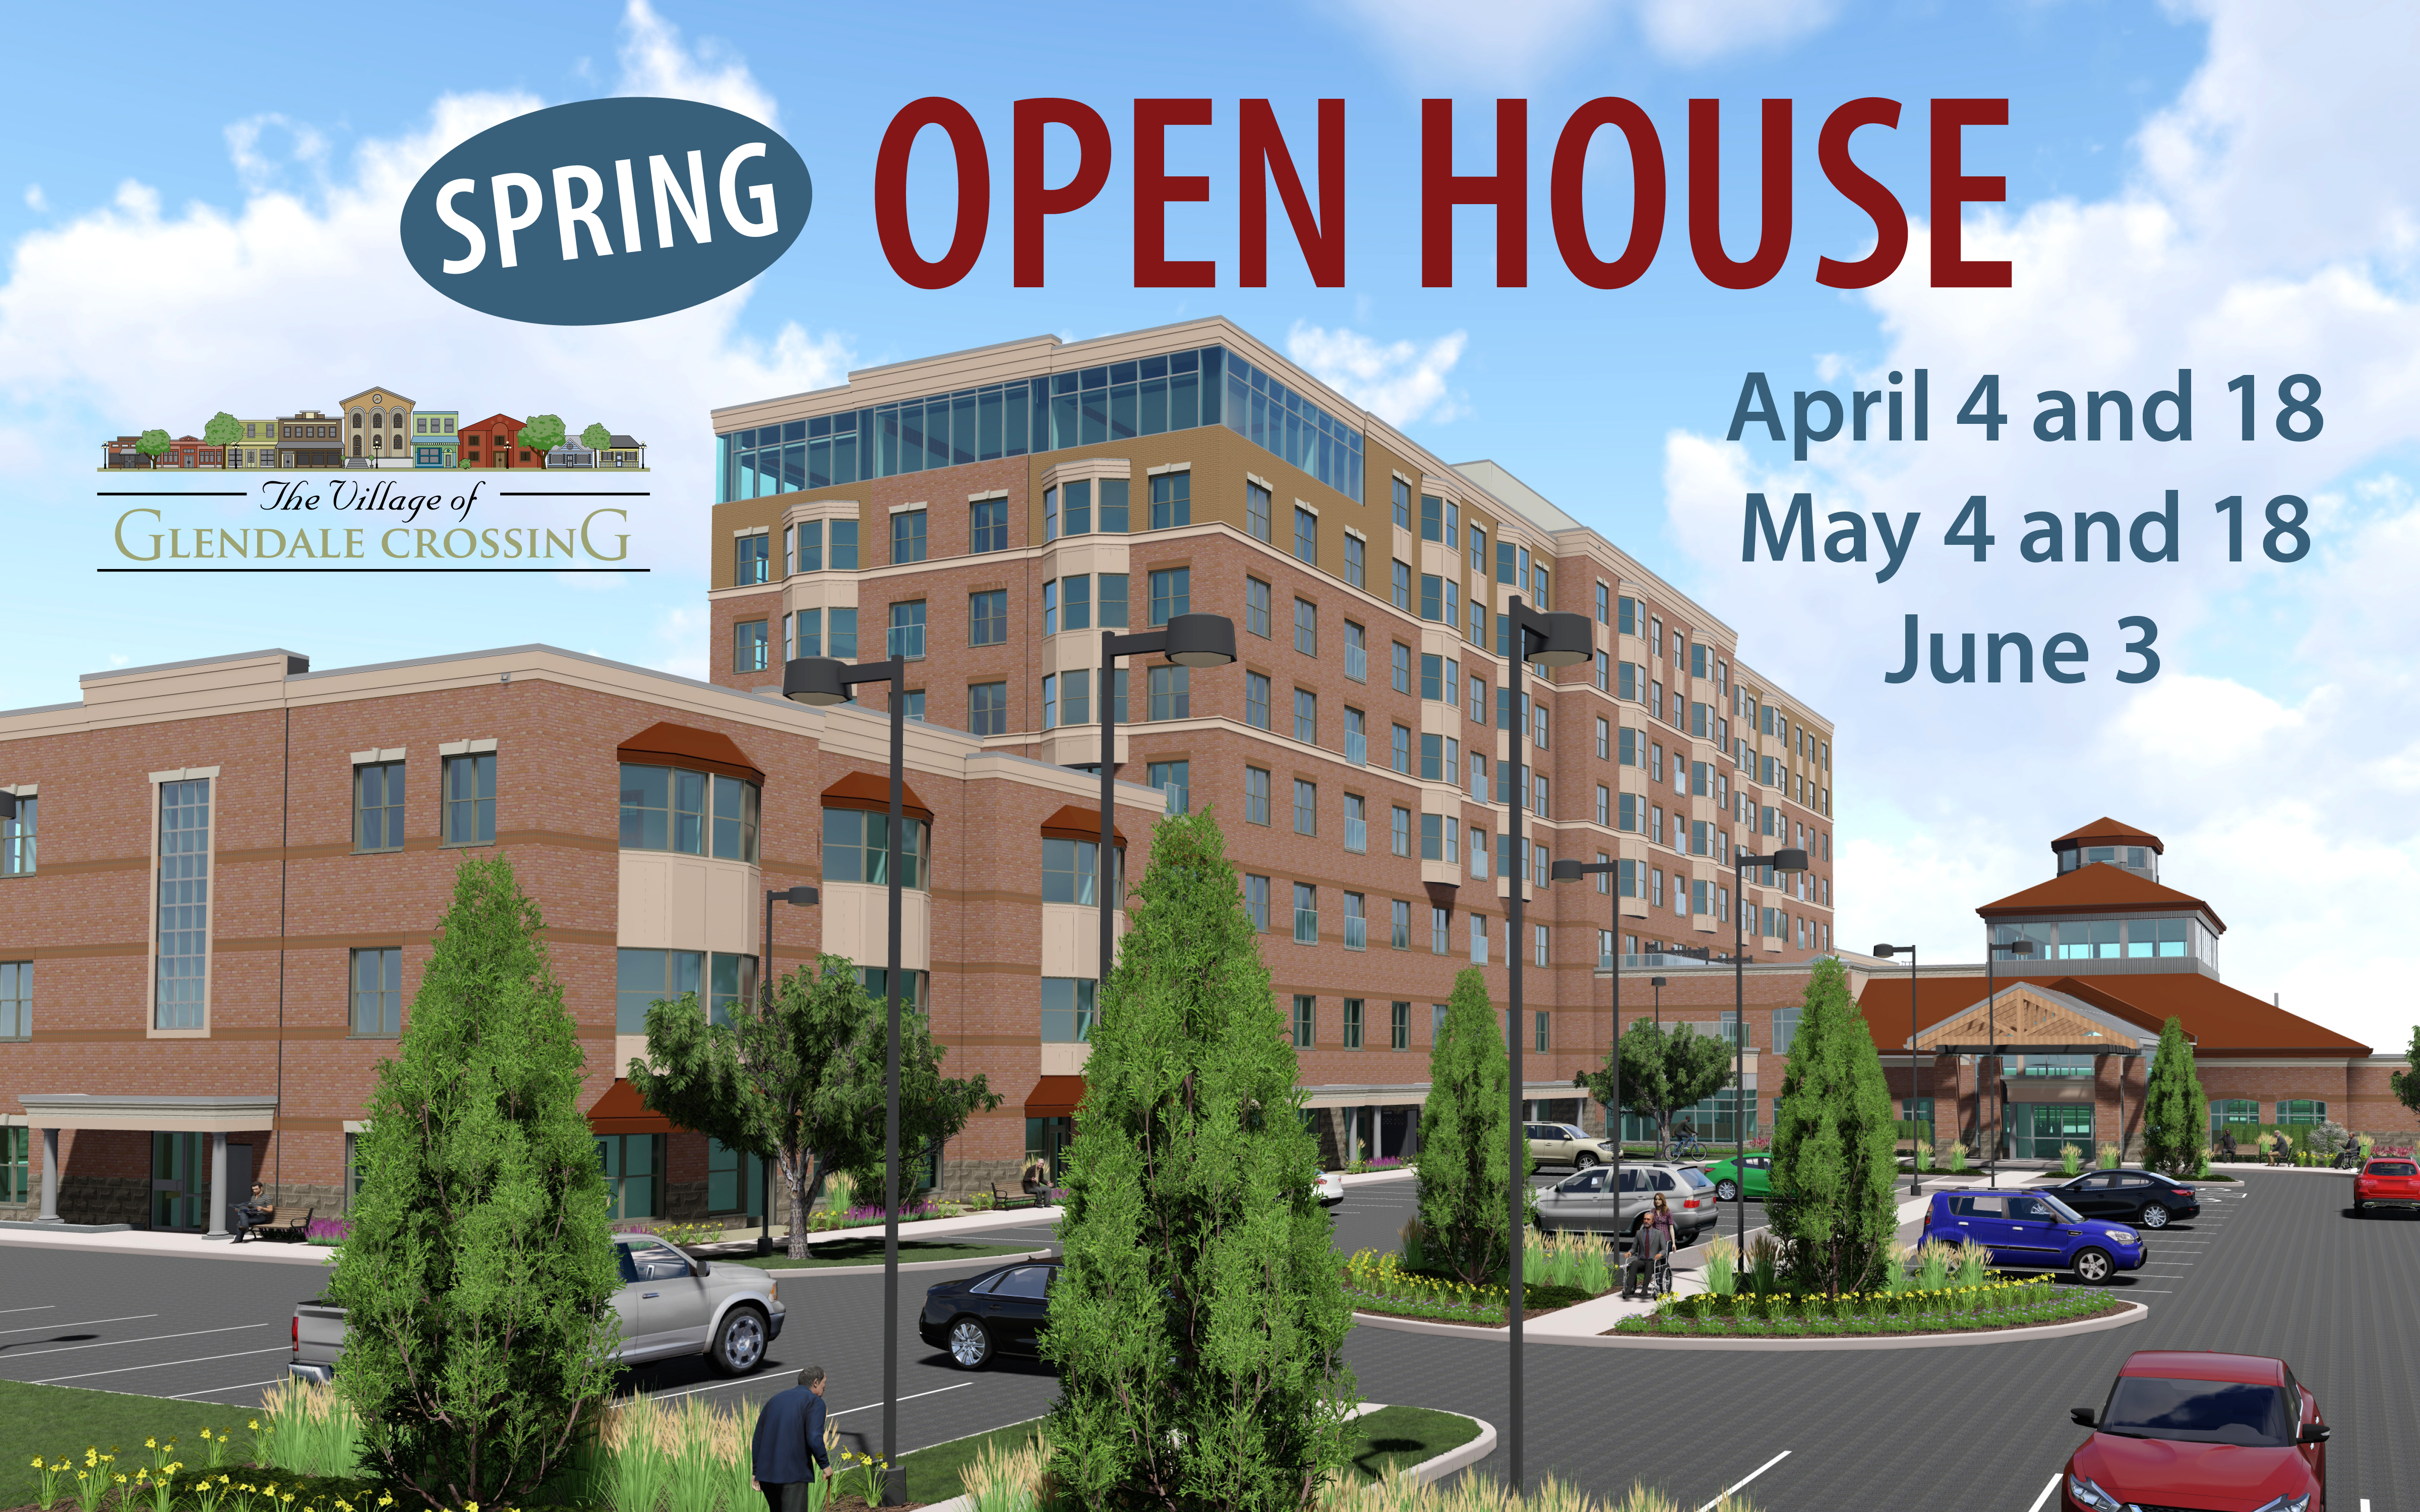 Designed image of The Village of Glendale Crossing Retirement in London promoting the Spring Open House